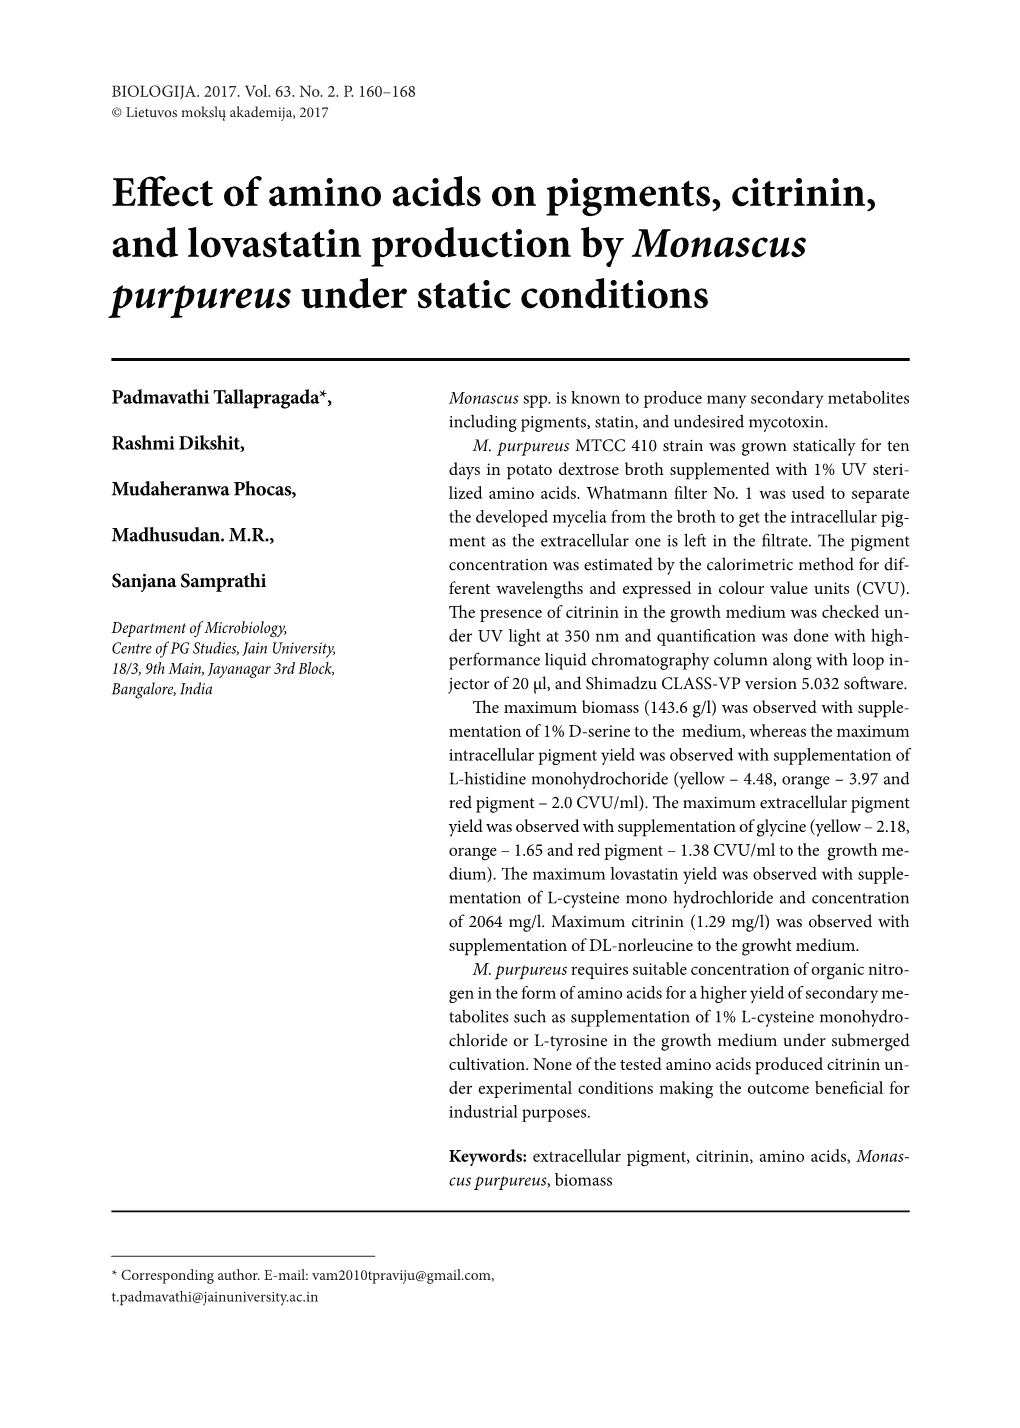 Effect of Amino Acids on Pigments, Citrinin, and Lovastatin Production by Monascus Purpureus Under Static Conditions